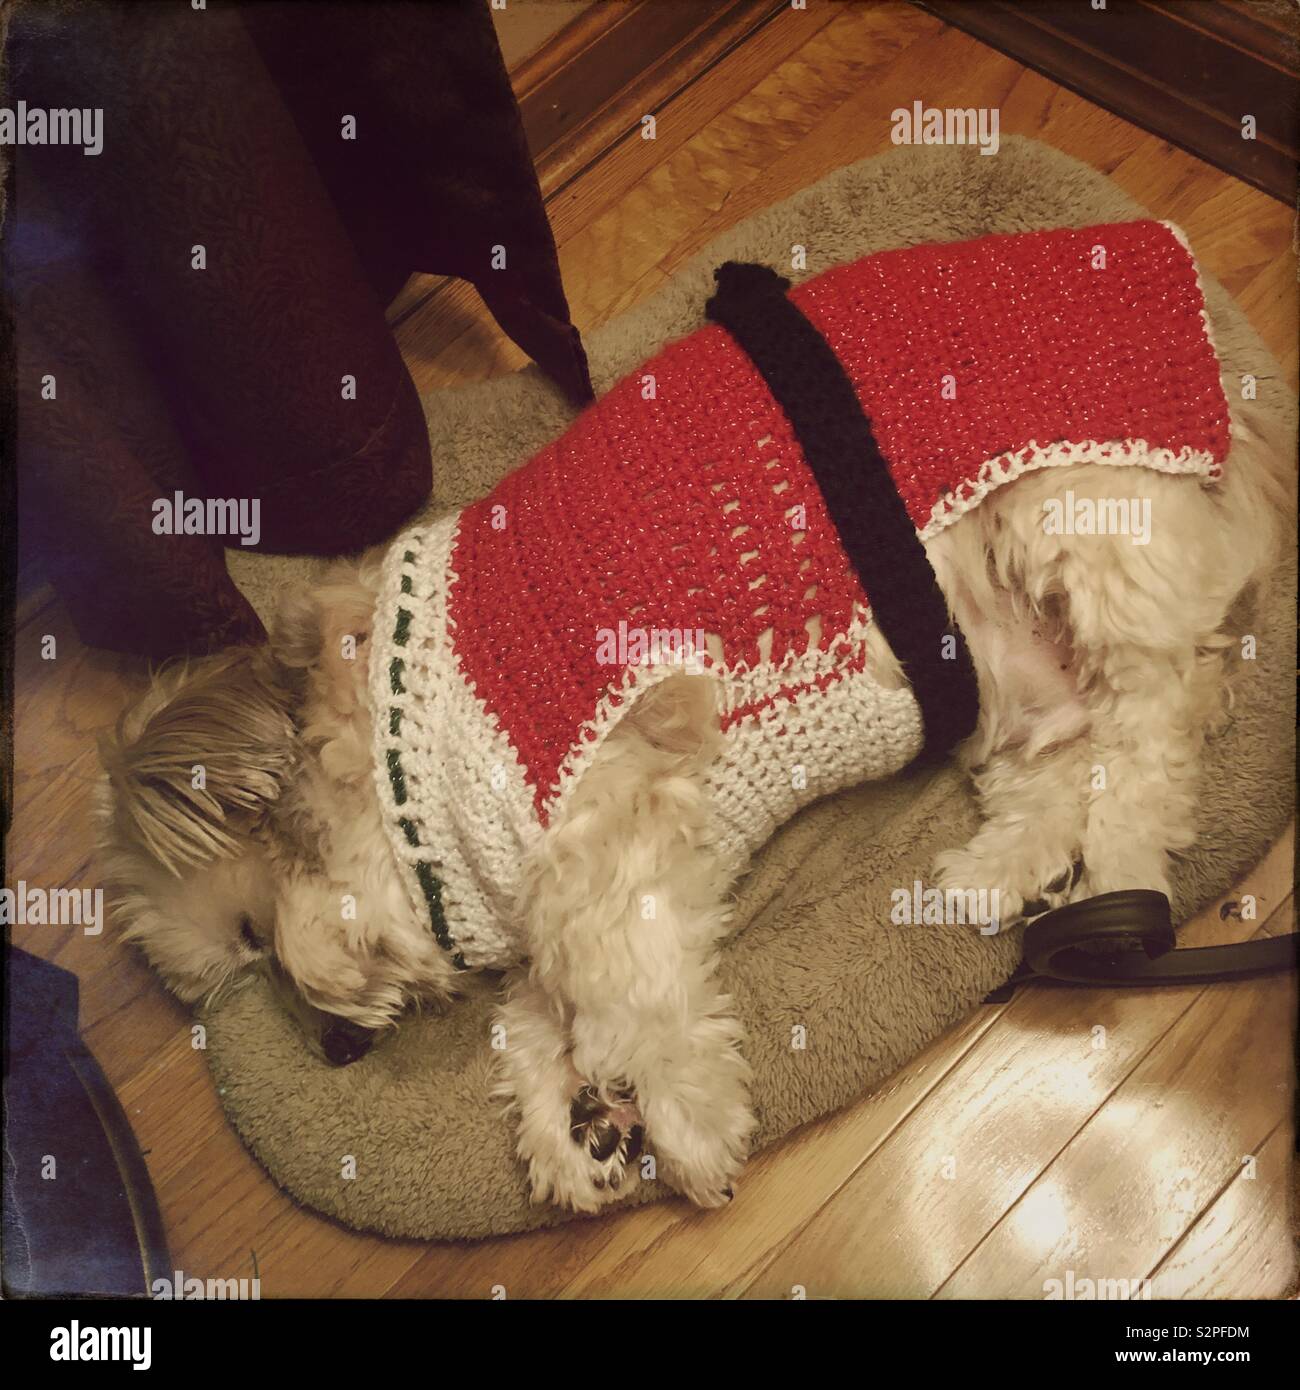 A tired dog in a crocheted Santa suit; shot in Hipstamatic. Stock Photo